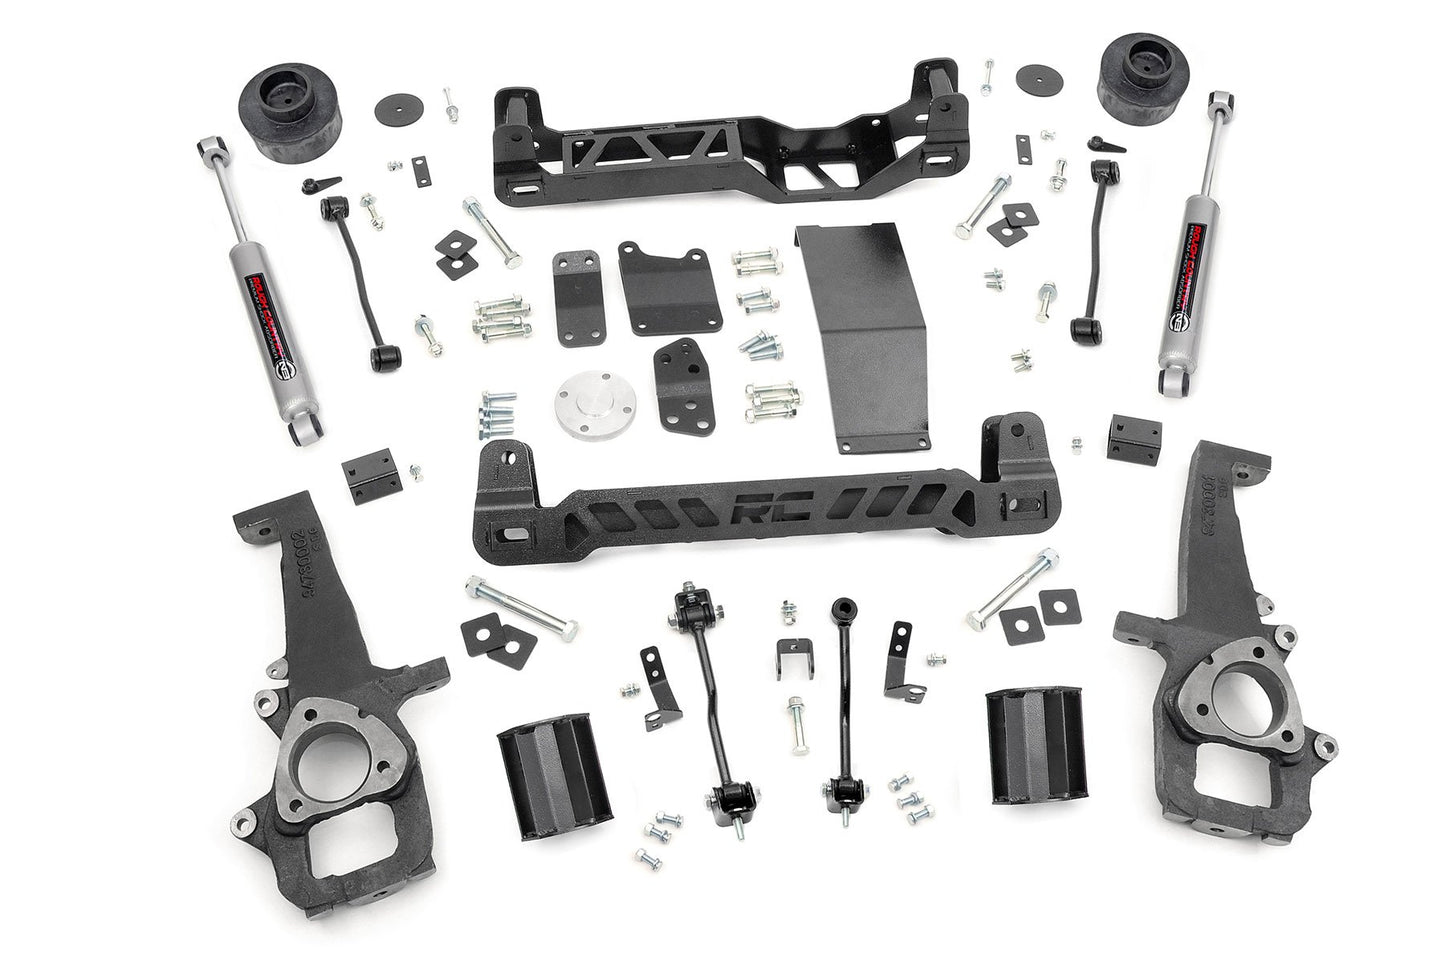 Rough Country (32830) 4 Inch Lift Kit | Ram 1500 4WD